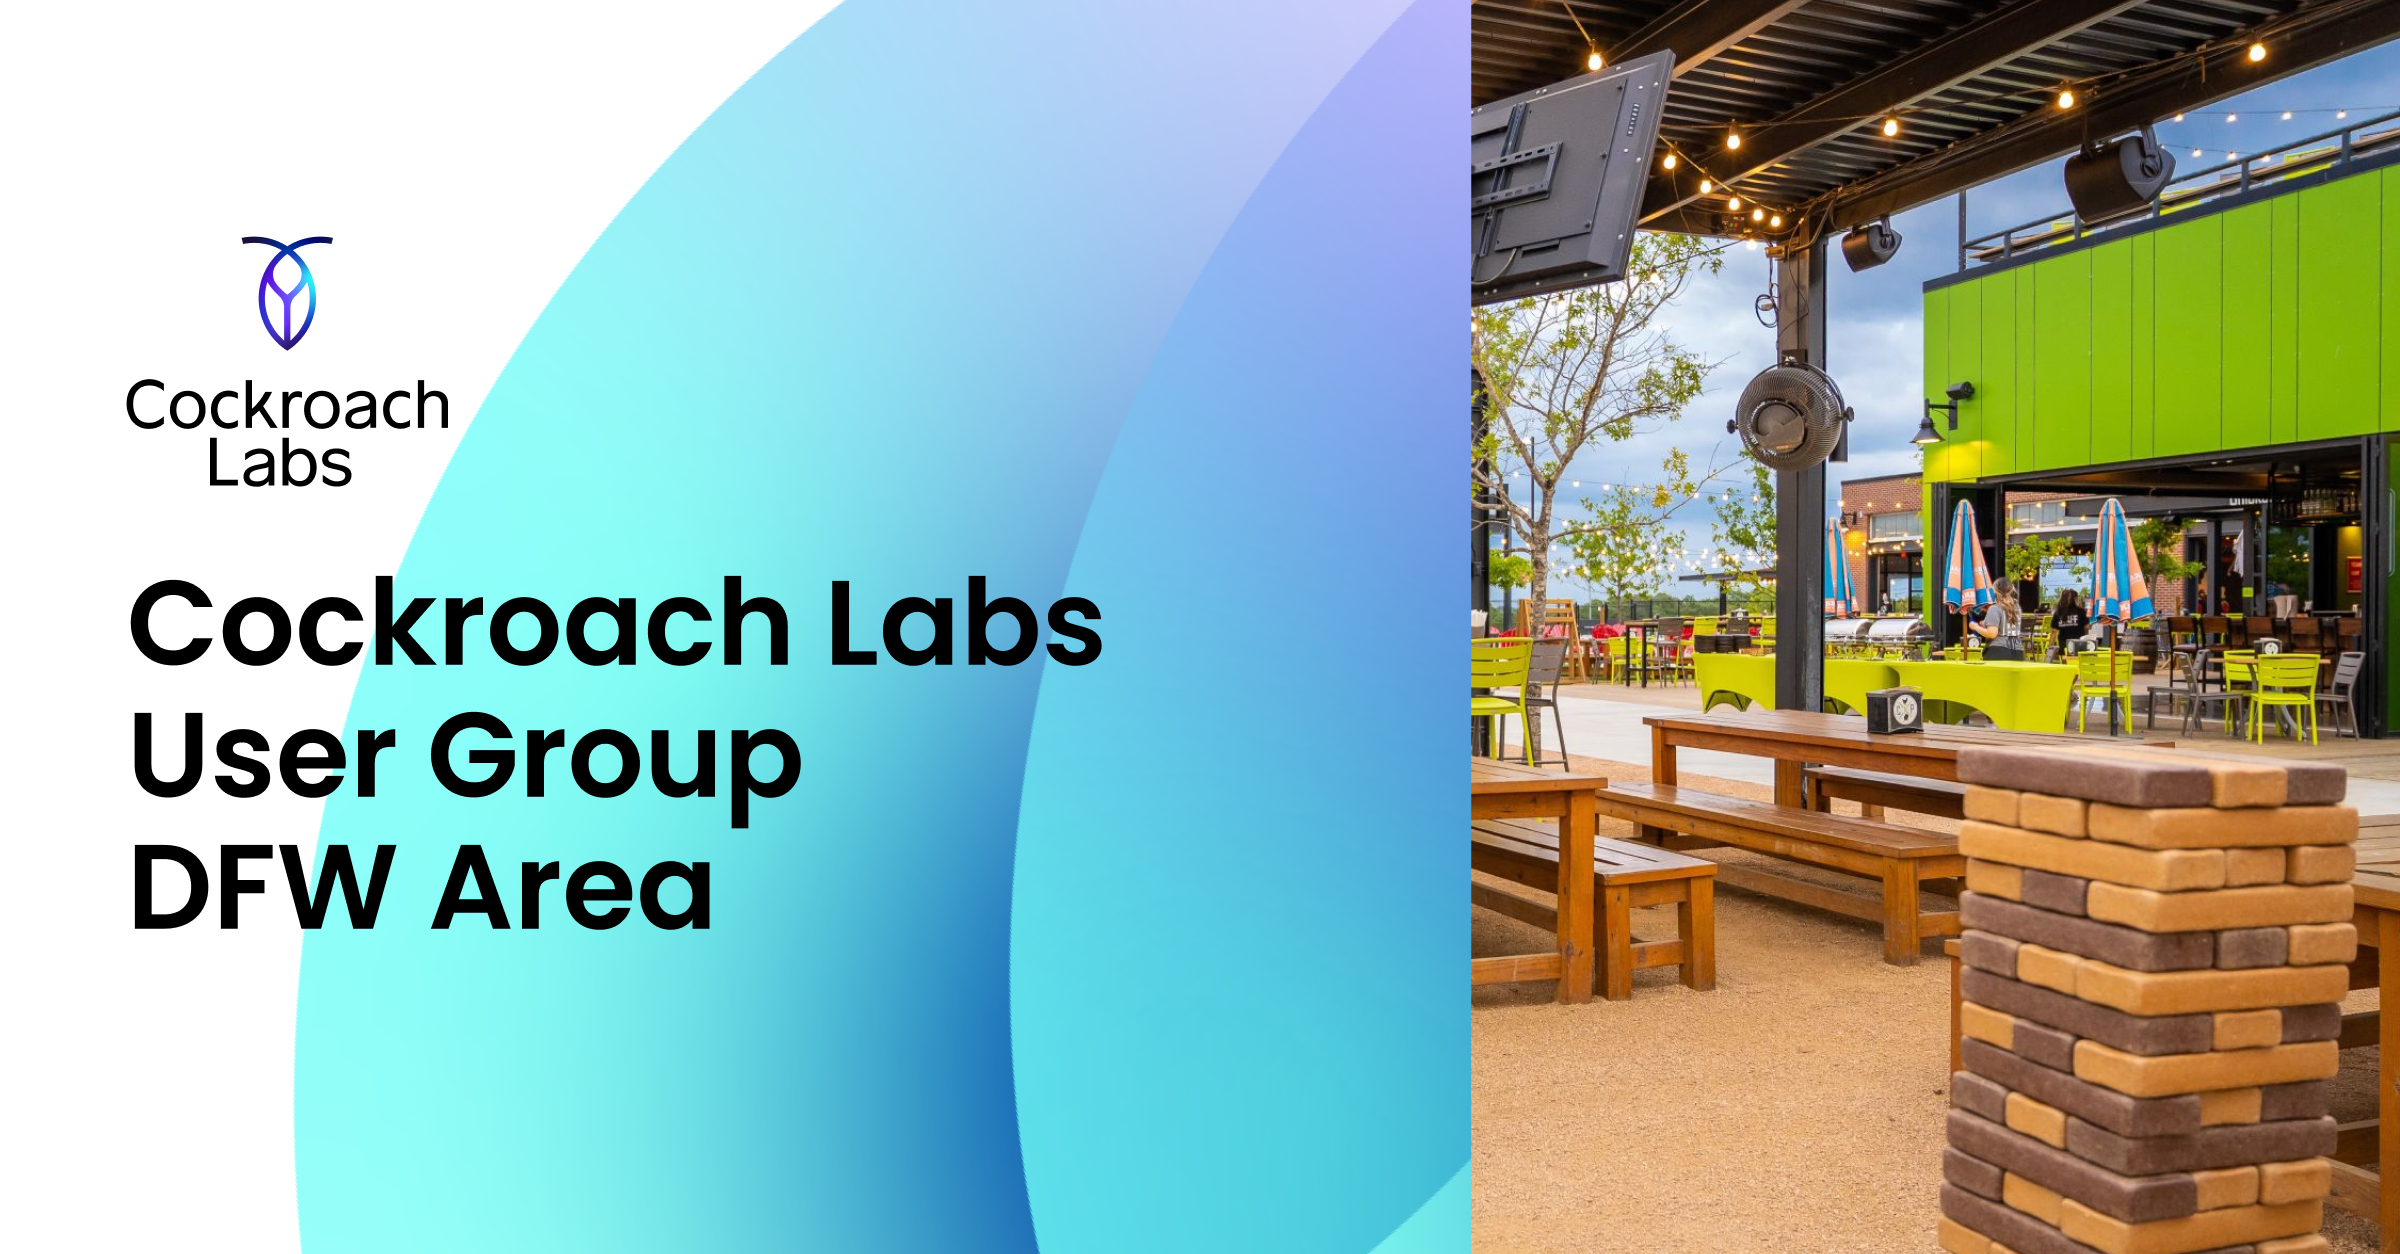 Cockroach Labs User Group - DFW Area